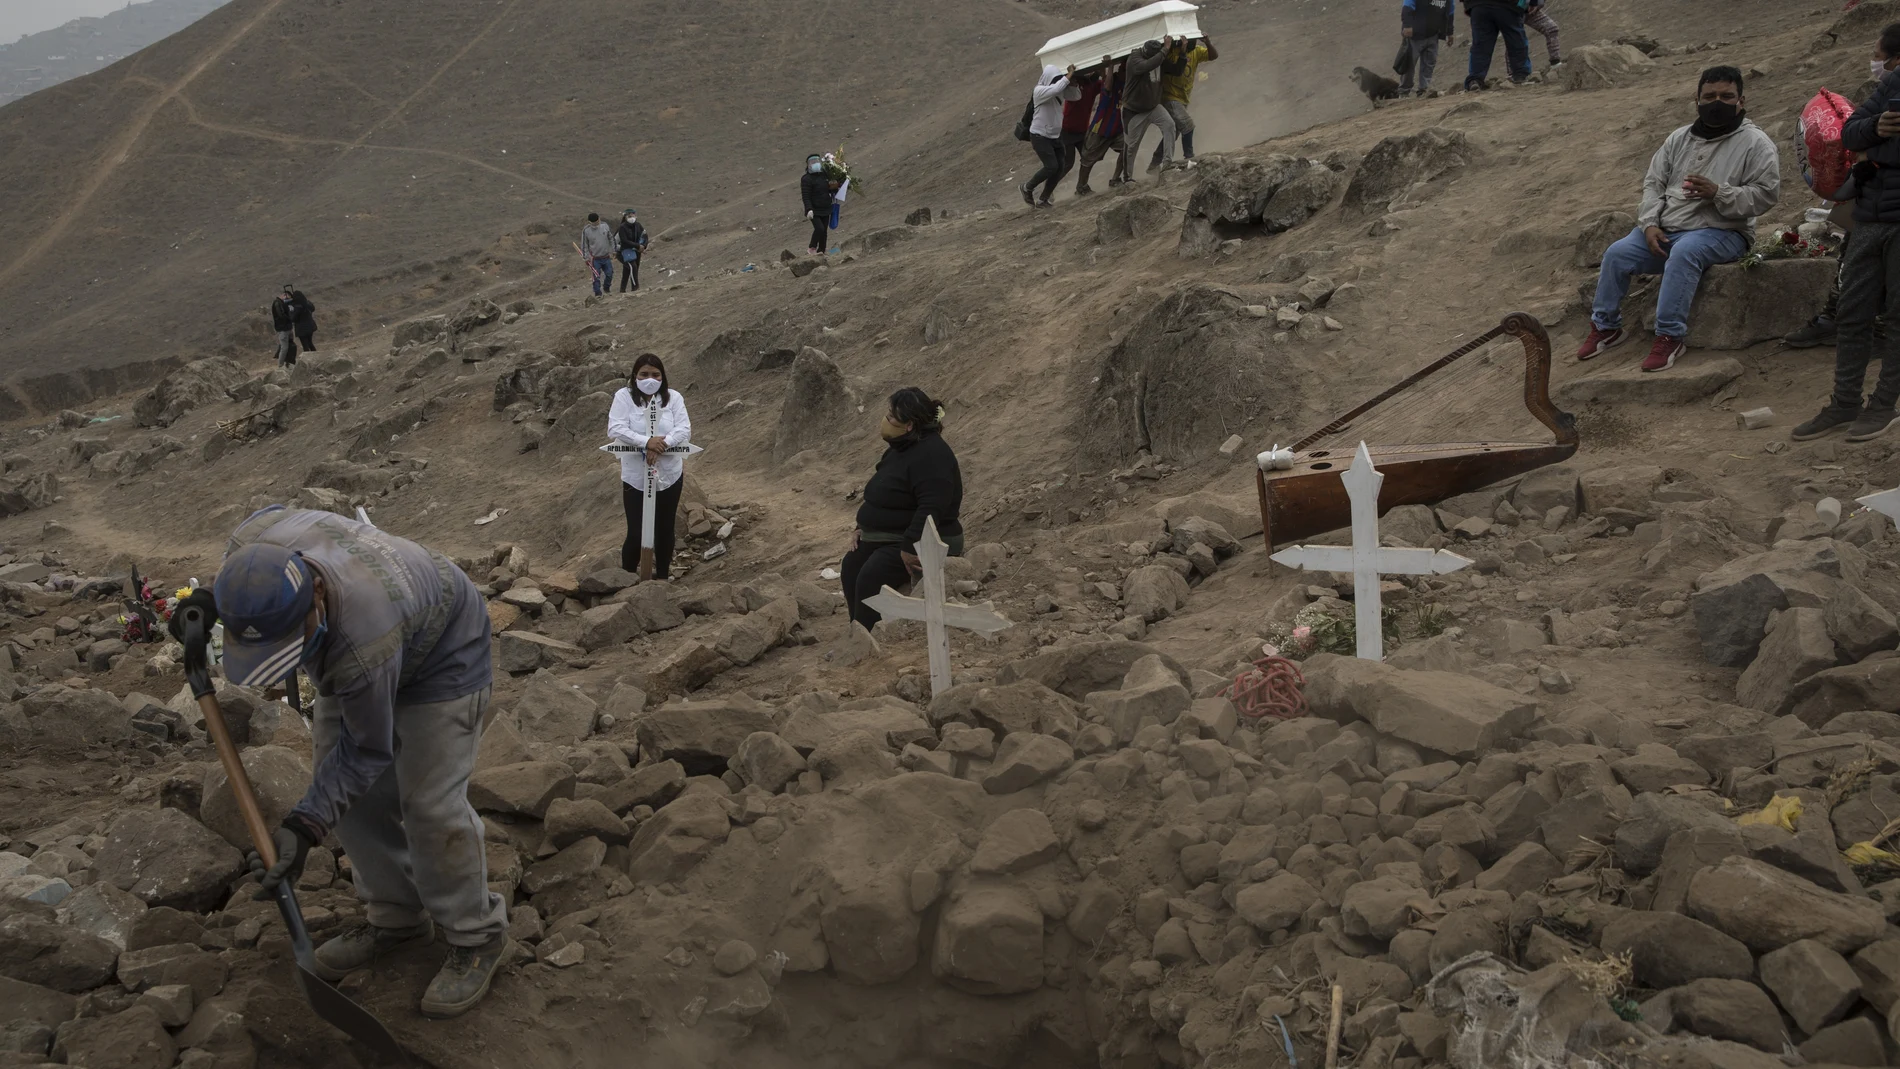 FILE - In this May 27, 2020, file photo, a cemetery worker shovels dirt into a grave that contains the remains of Apolonia Uanampa, who died from the coronavirus, as the coffin that contains the remains of Demetria Huamani, also a victim of the virus, is carried to her burial site at the Nueva Esperanza cemetery on the outskirts of Lima, Peru. A new snapshot of the frantic global response to the coronavirus pandemic shows some of the world's largest government donors of humanitarian assistance are buckling under the strain and overall aid commitments have dropped by a third from the same period last year. (AP Photo/Rodrigo Abd, File)